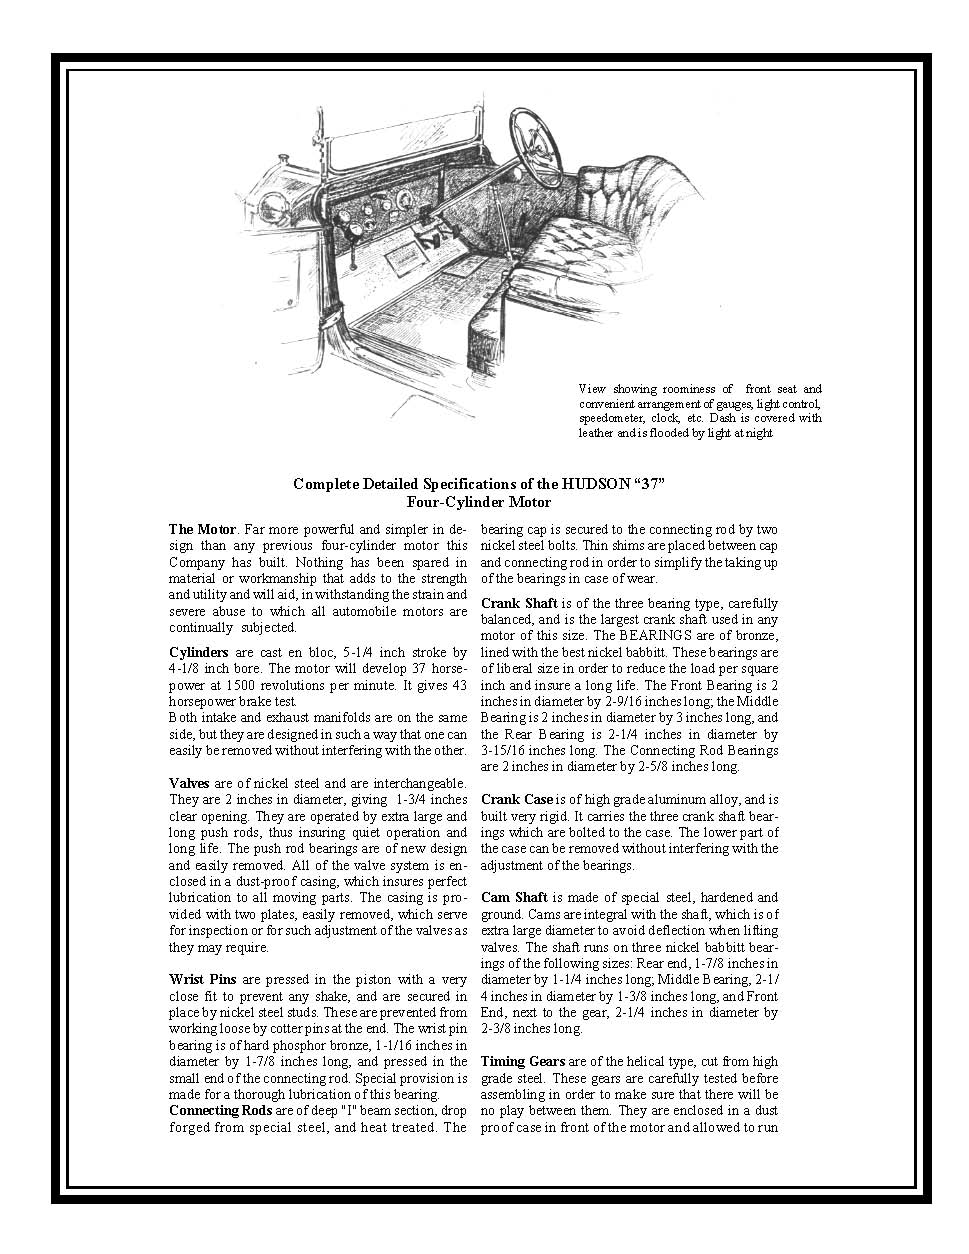 1913 Hudson Instruction Book Page 5